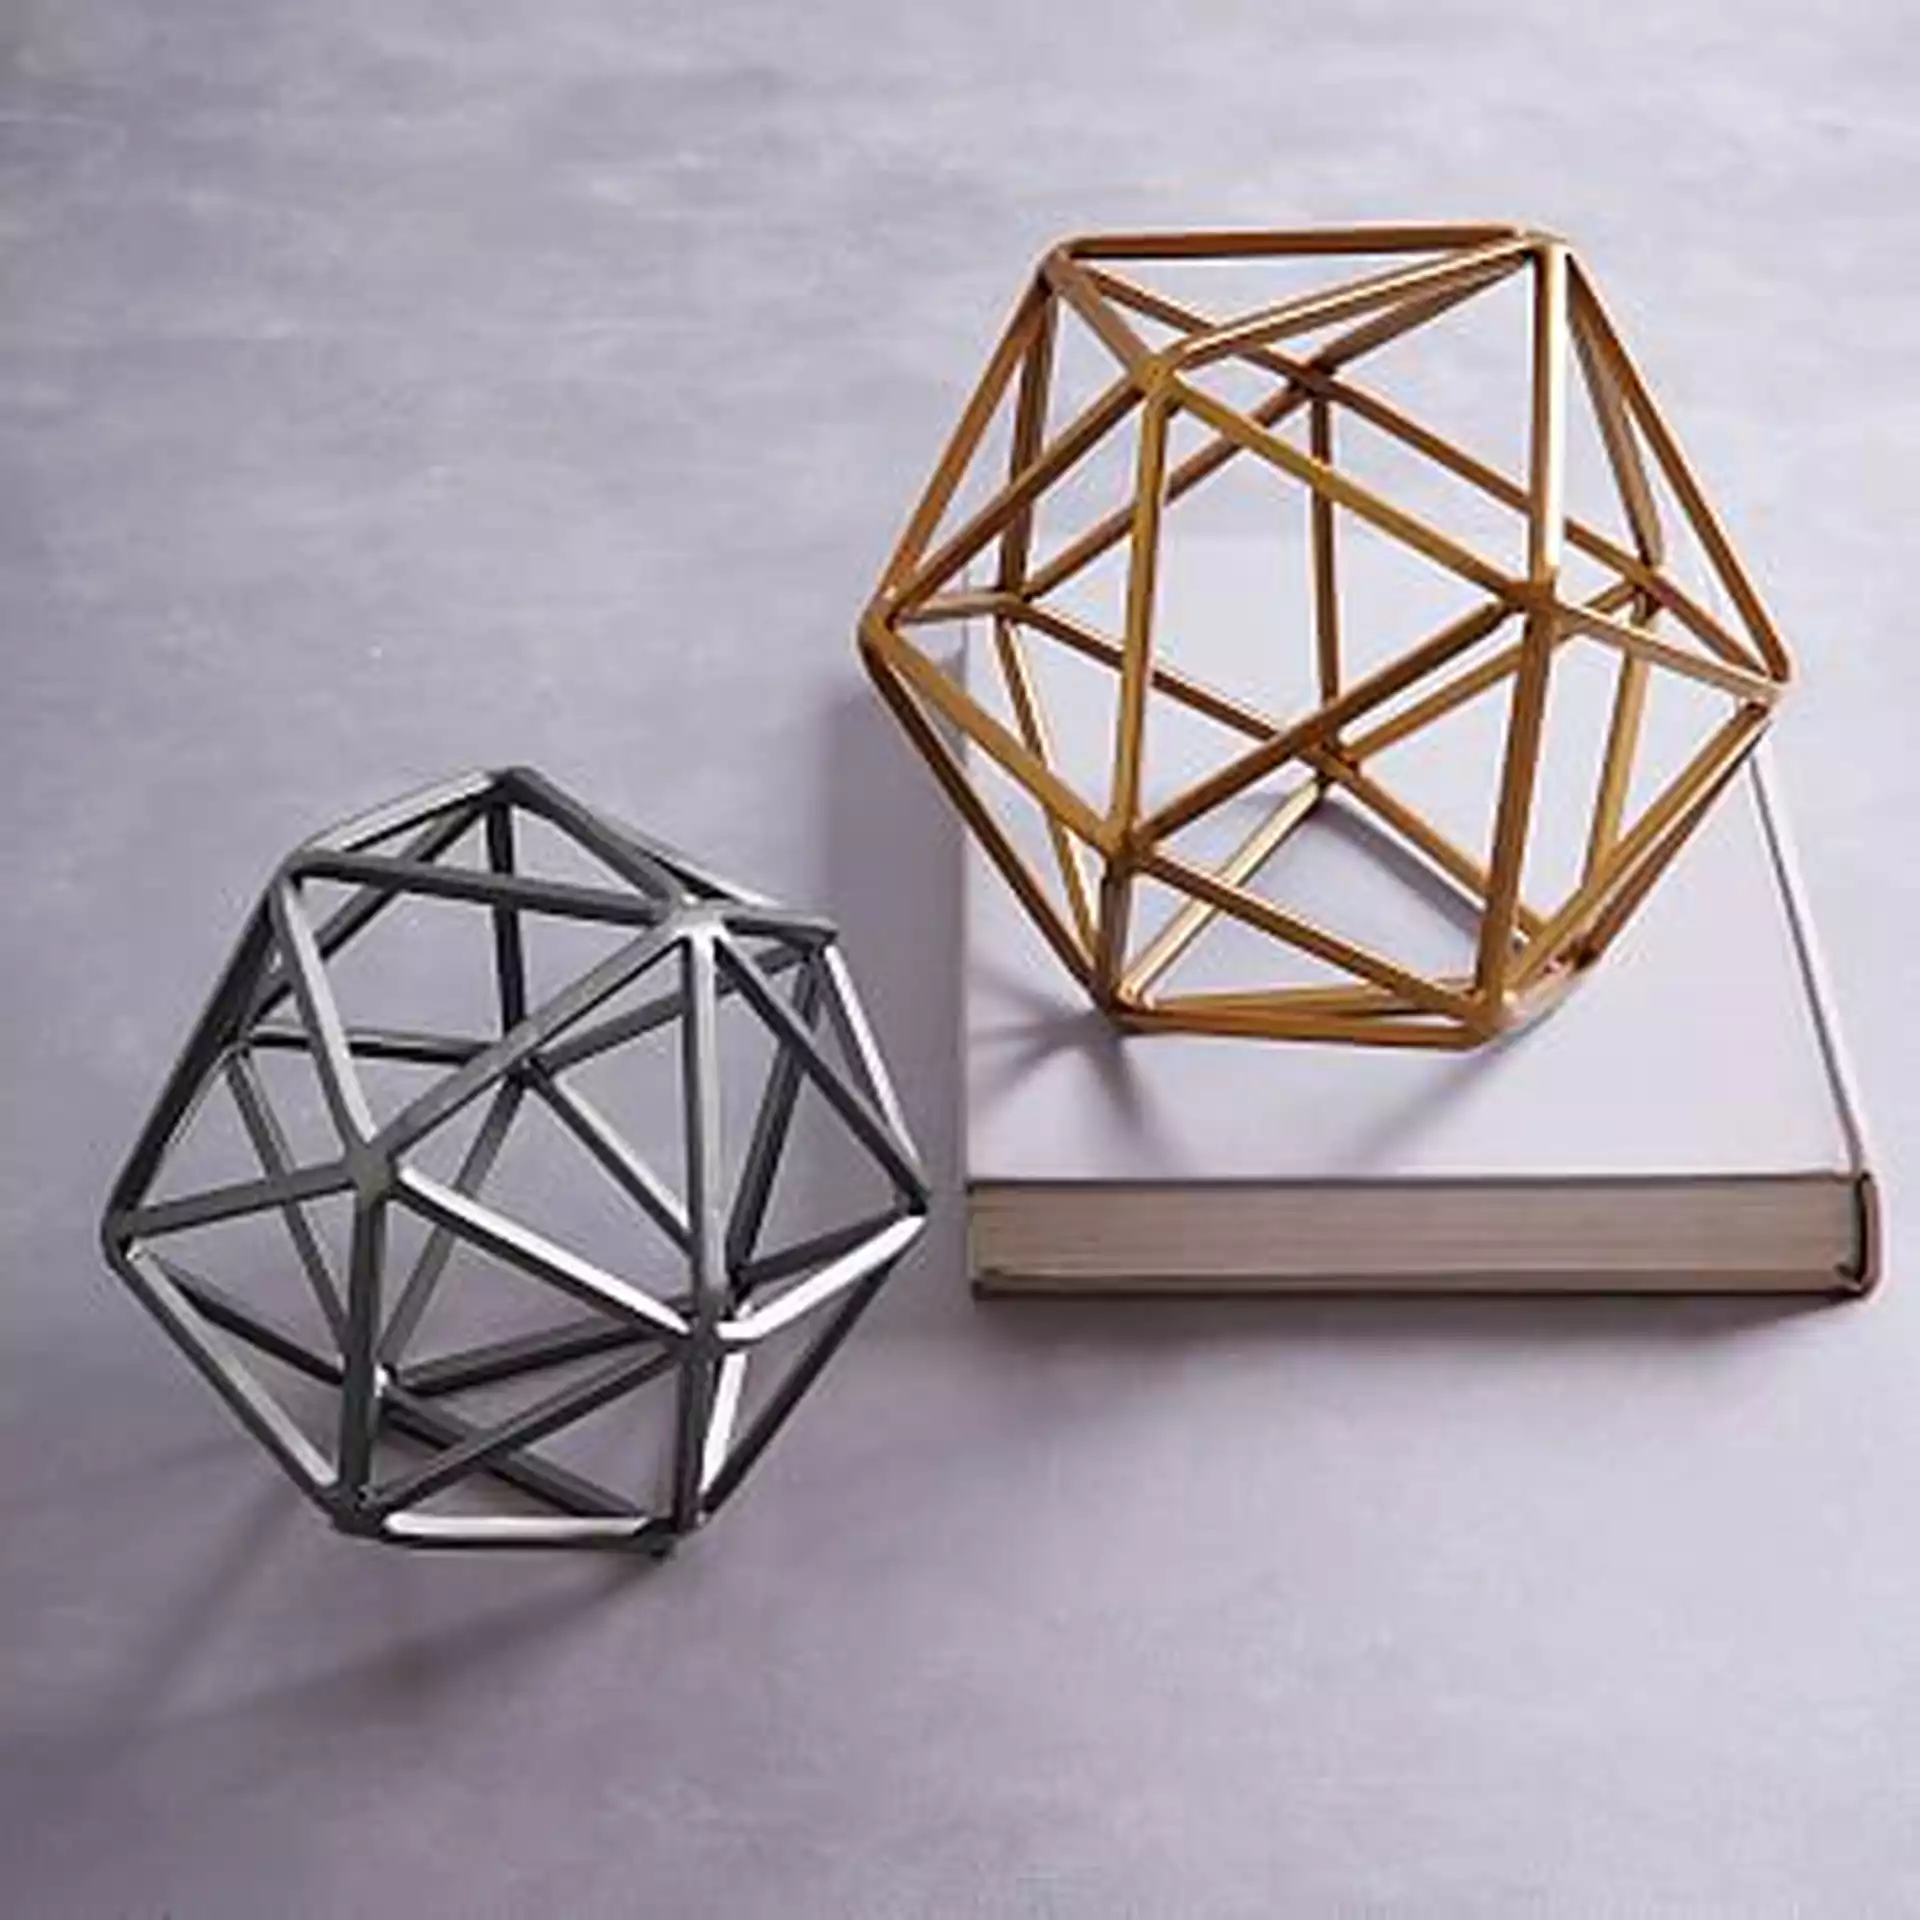 Symmetry Object, Small Octahedron, Gold